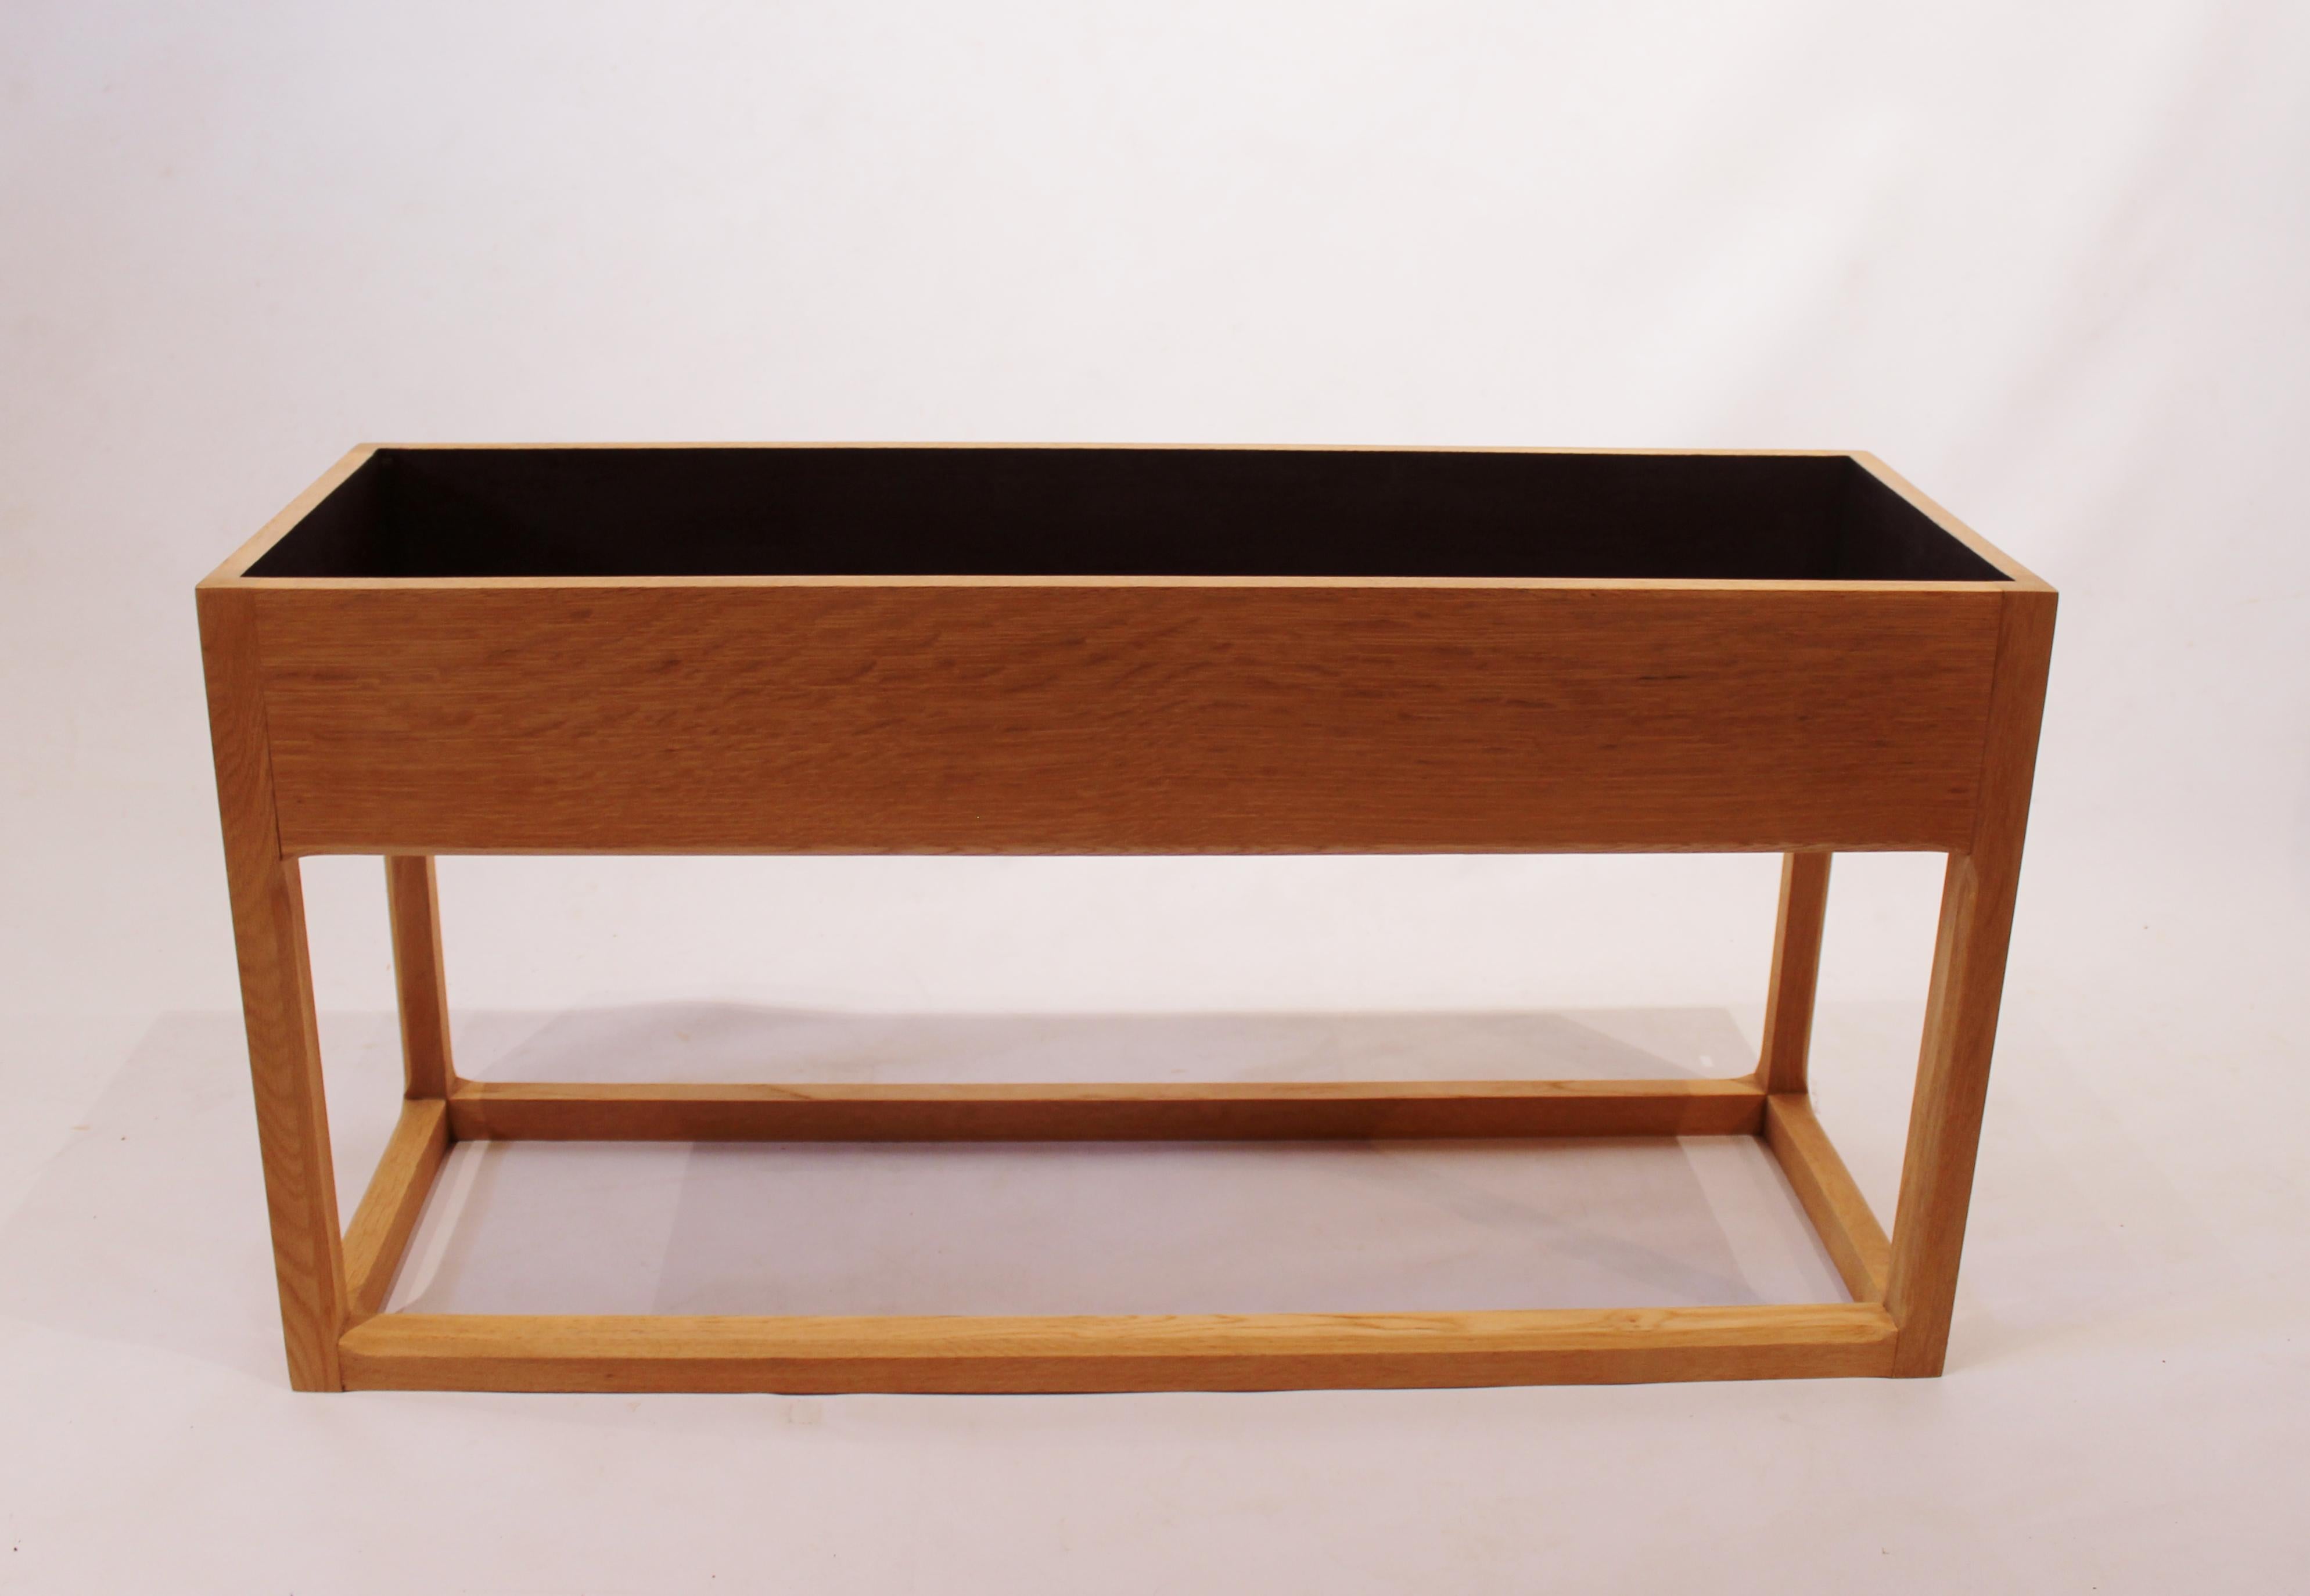 Flower box of light soap treated oak. The item is of Danish design from the 1960s and in great vintage condition. It can be used for flowers, but also as a decorative piece for other items.